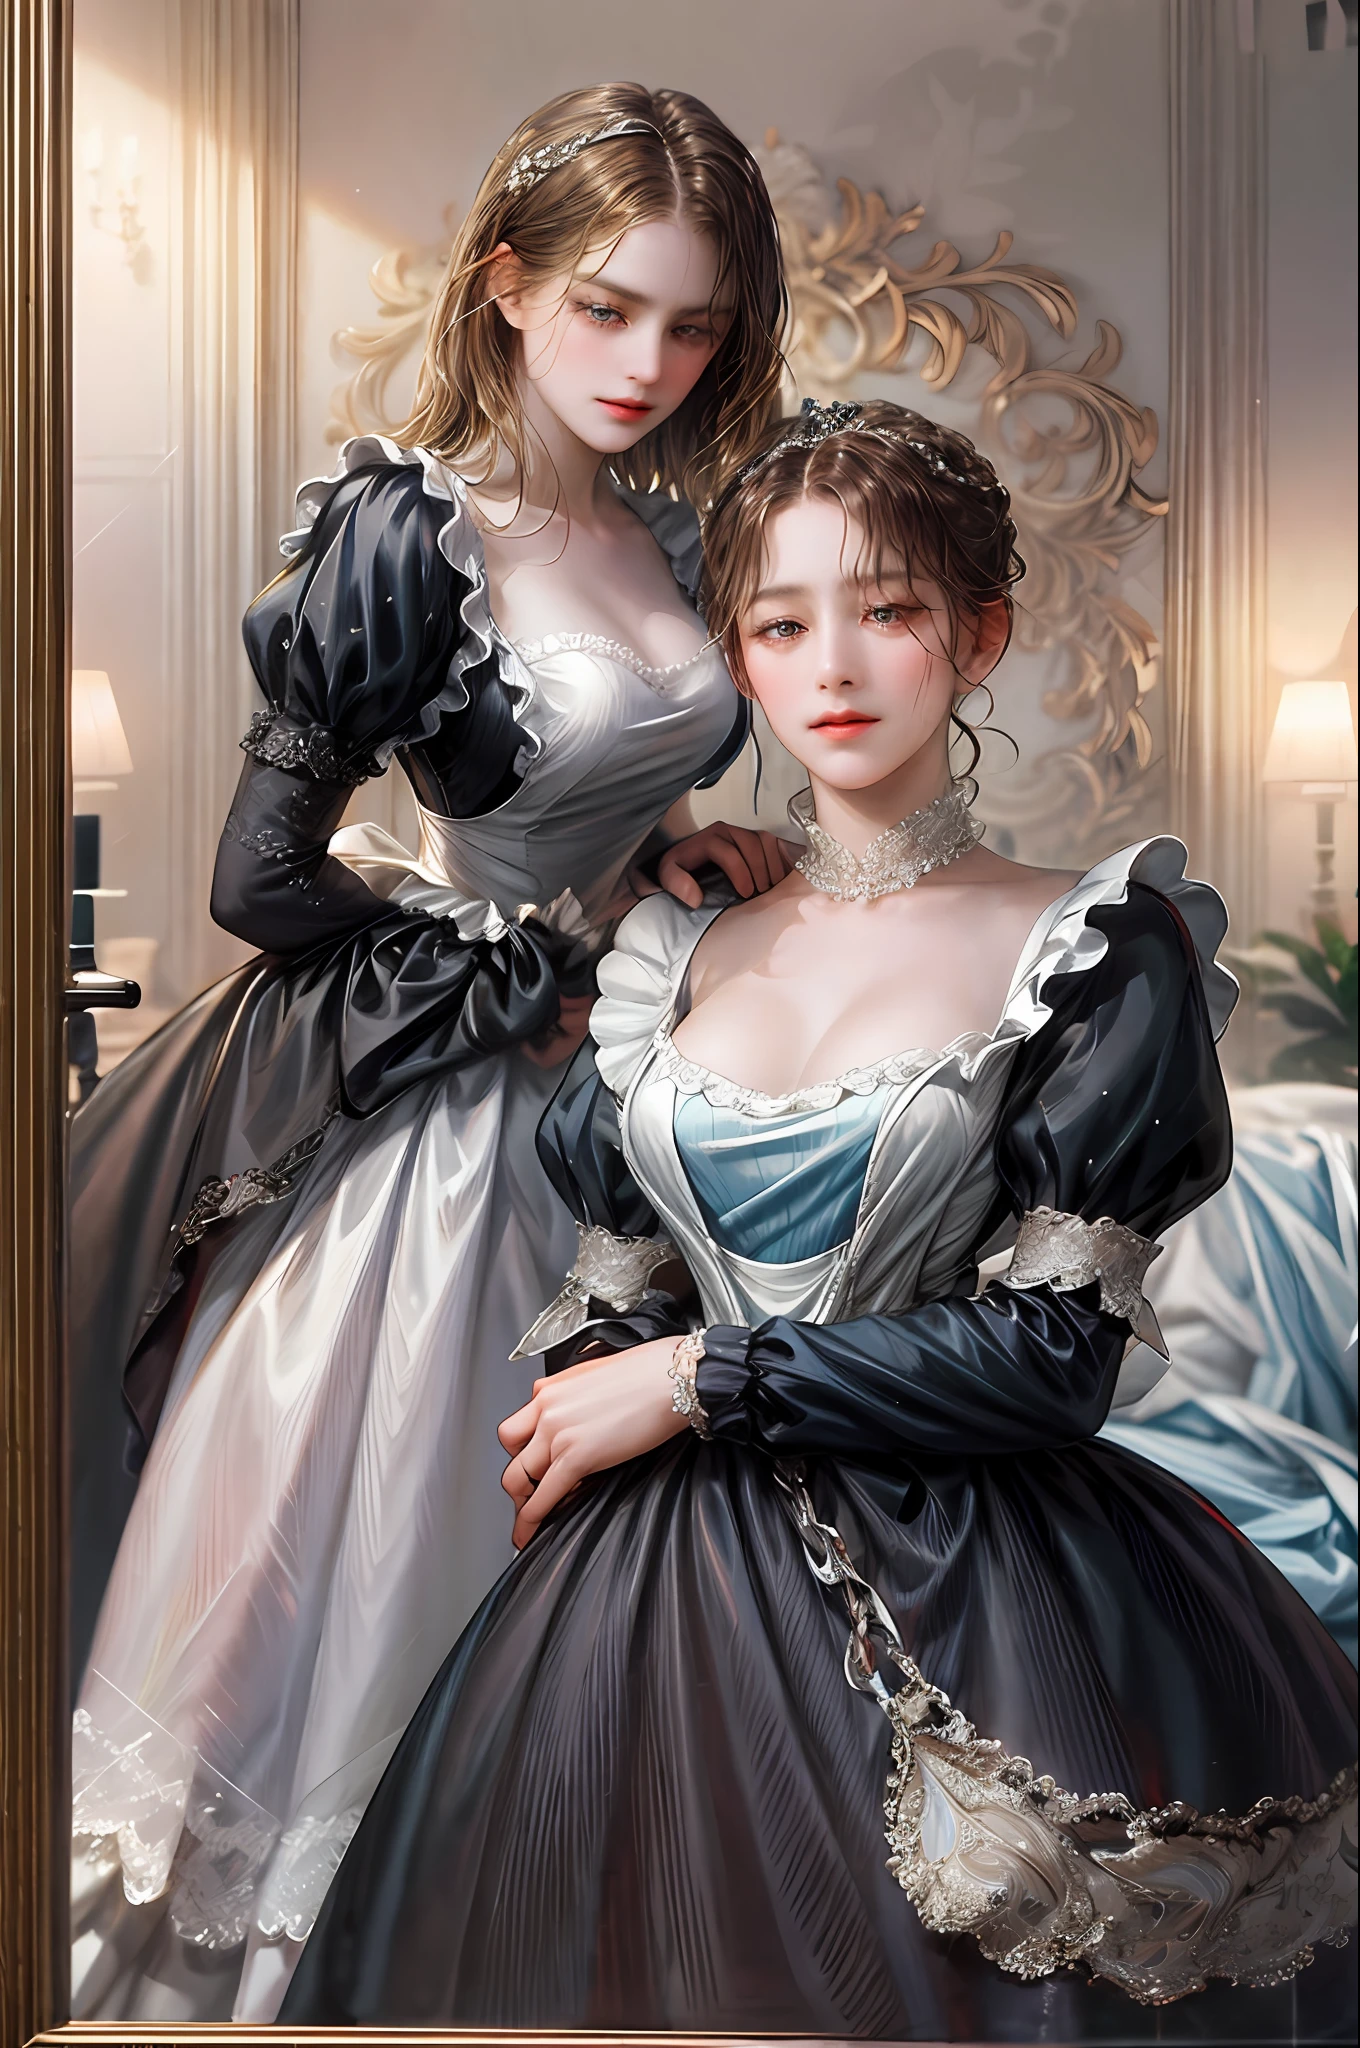 8:57
Masterpiece, best quality, Lesbians, lesbian relationship, two girls, in the foreground, one of the two girls, the young maid, could be depicted standing in a defiant position, wearing her maid's uniform, but with a determined and courageous look in her eyes. You might have a pose that denotes confidence, as if you're defying social conventions. Next to him, would be the other girl of the nobility, the lady of the mansion, dressed in an elegant period dress, but her expression would reveal the internal struggle he feels for his love for the maid. Their faces may be slightly tilted toward each other